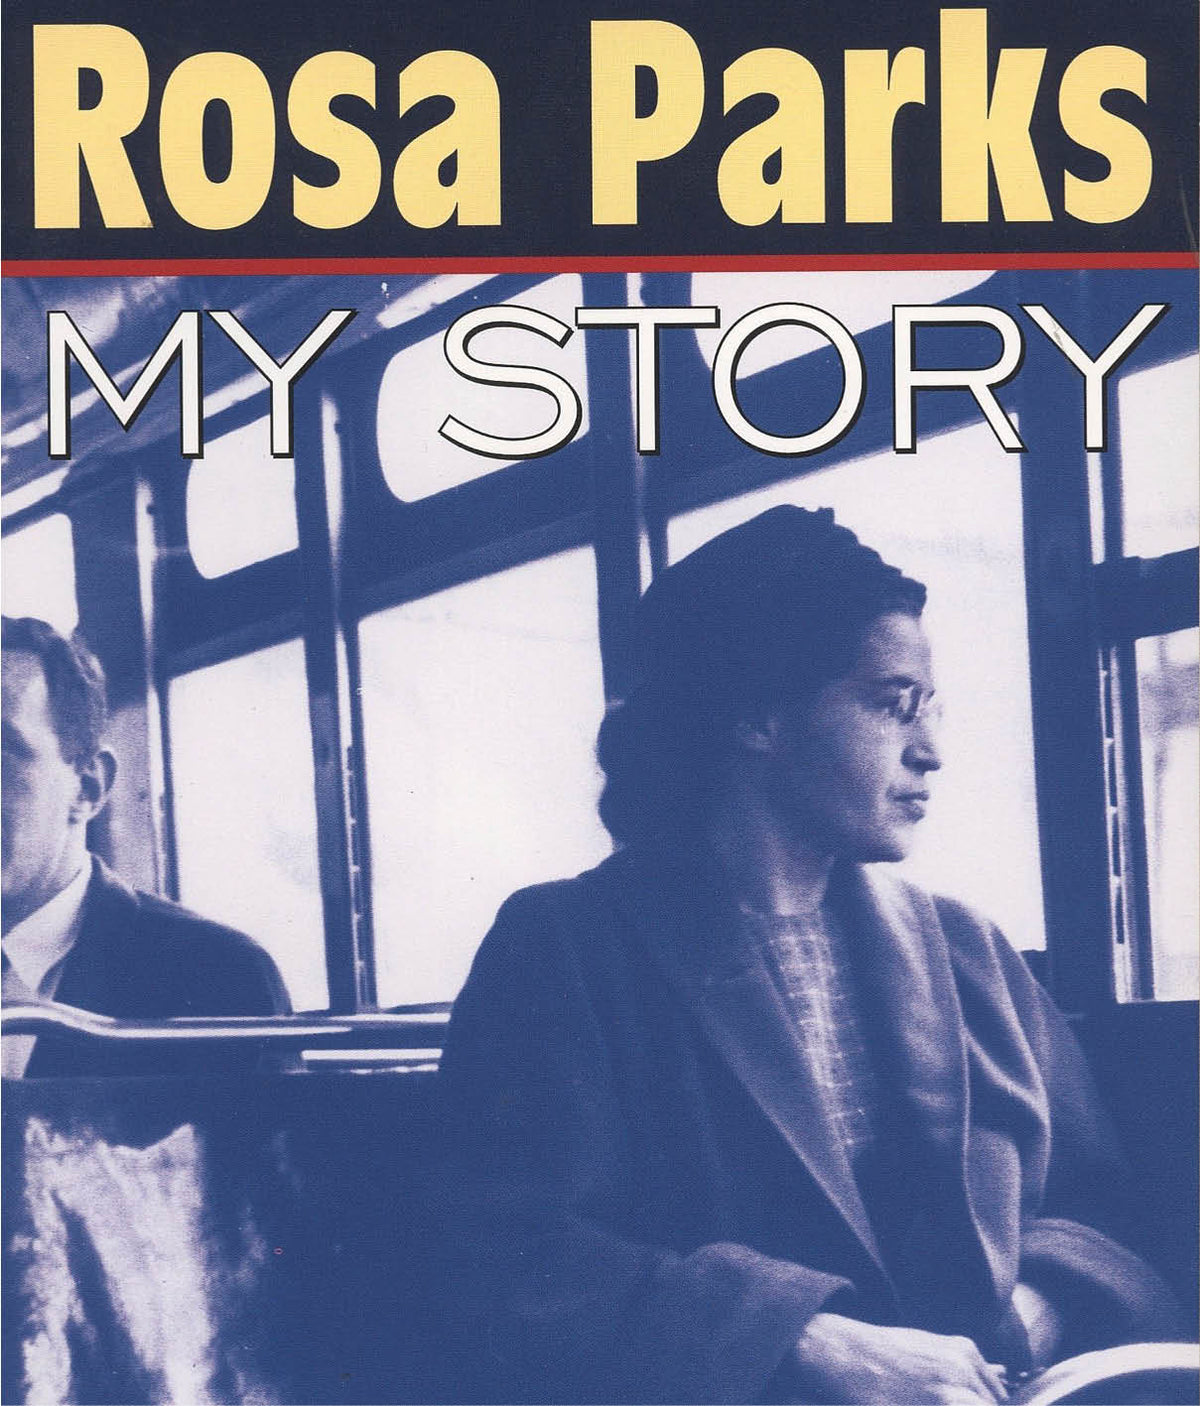 Rosa Parks: My Story by Jim Haskins